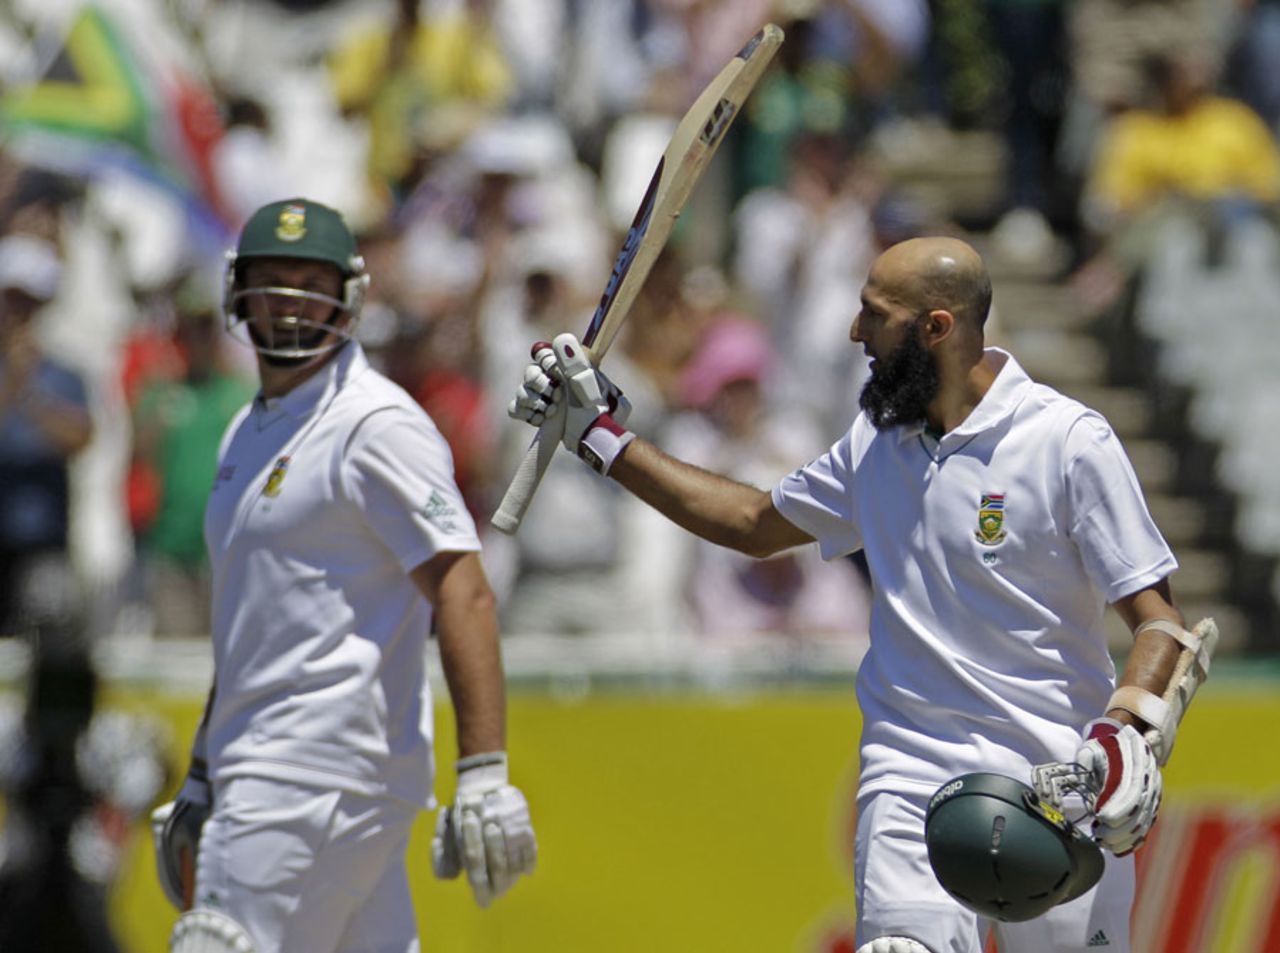 Graeme Smith has a word with Hashim Amla, South Africa v Australia, 1st Test, Cape Town, 3rd day, November 11, 2011